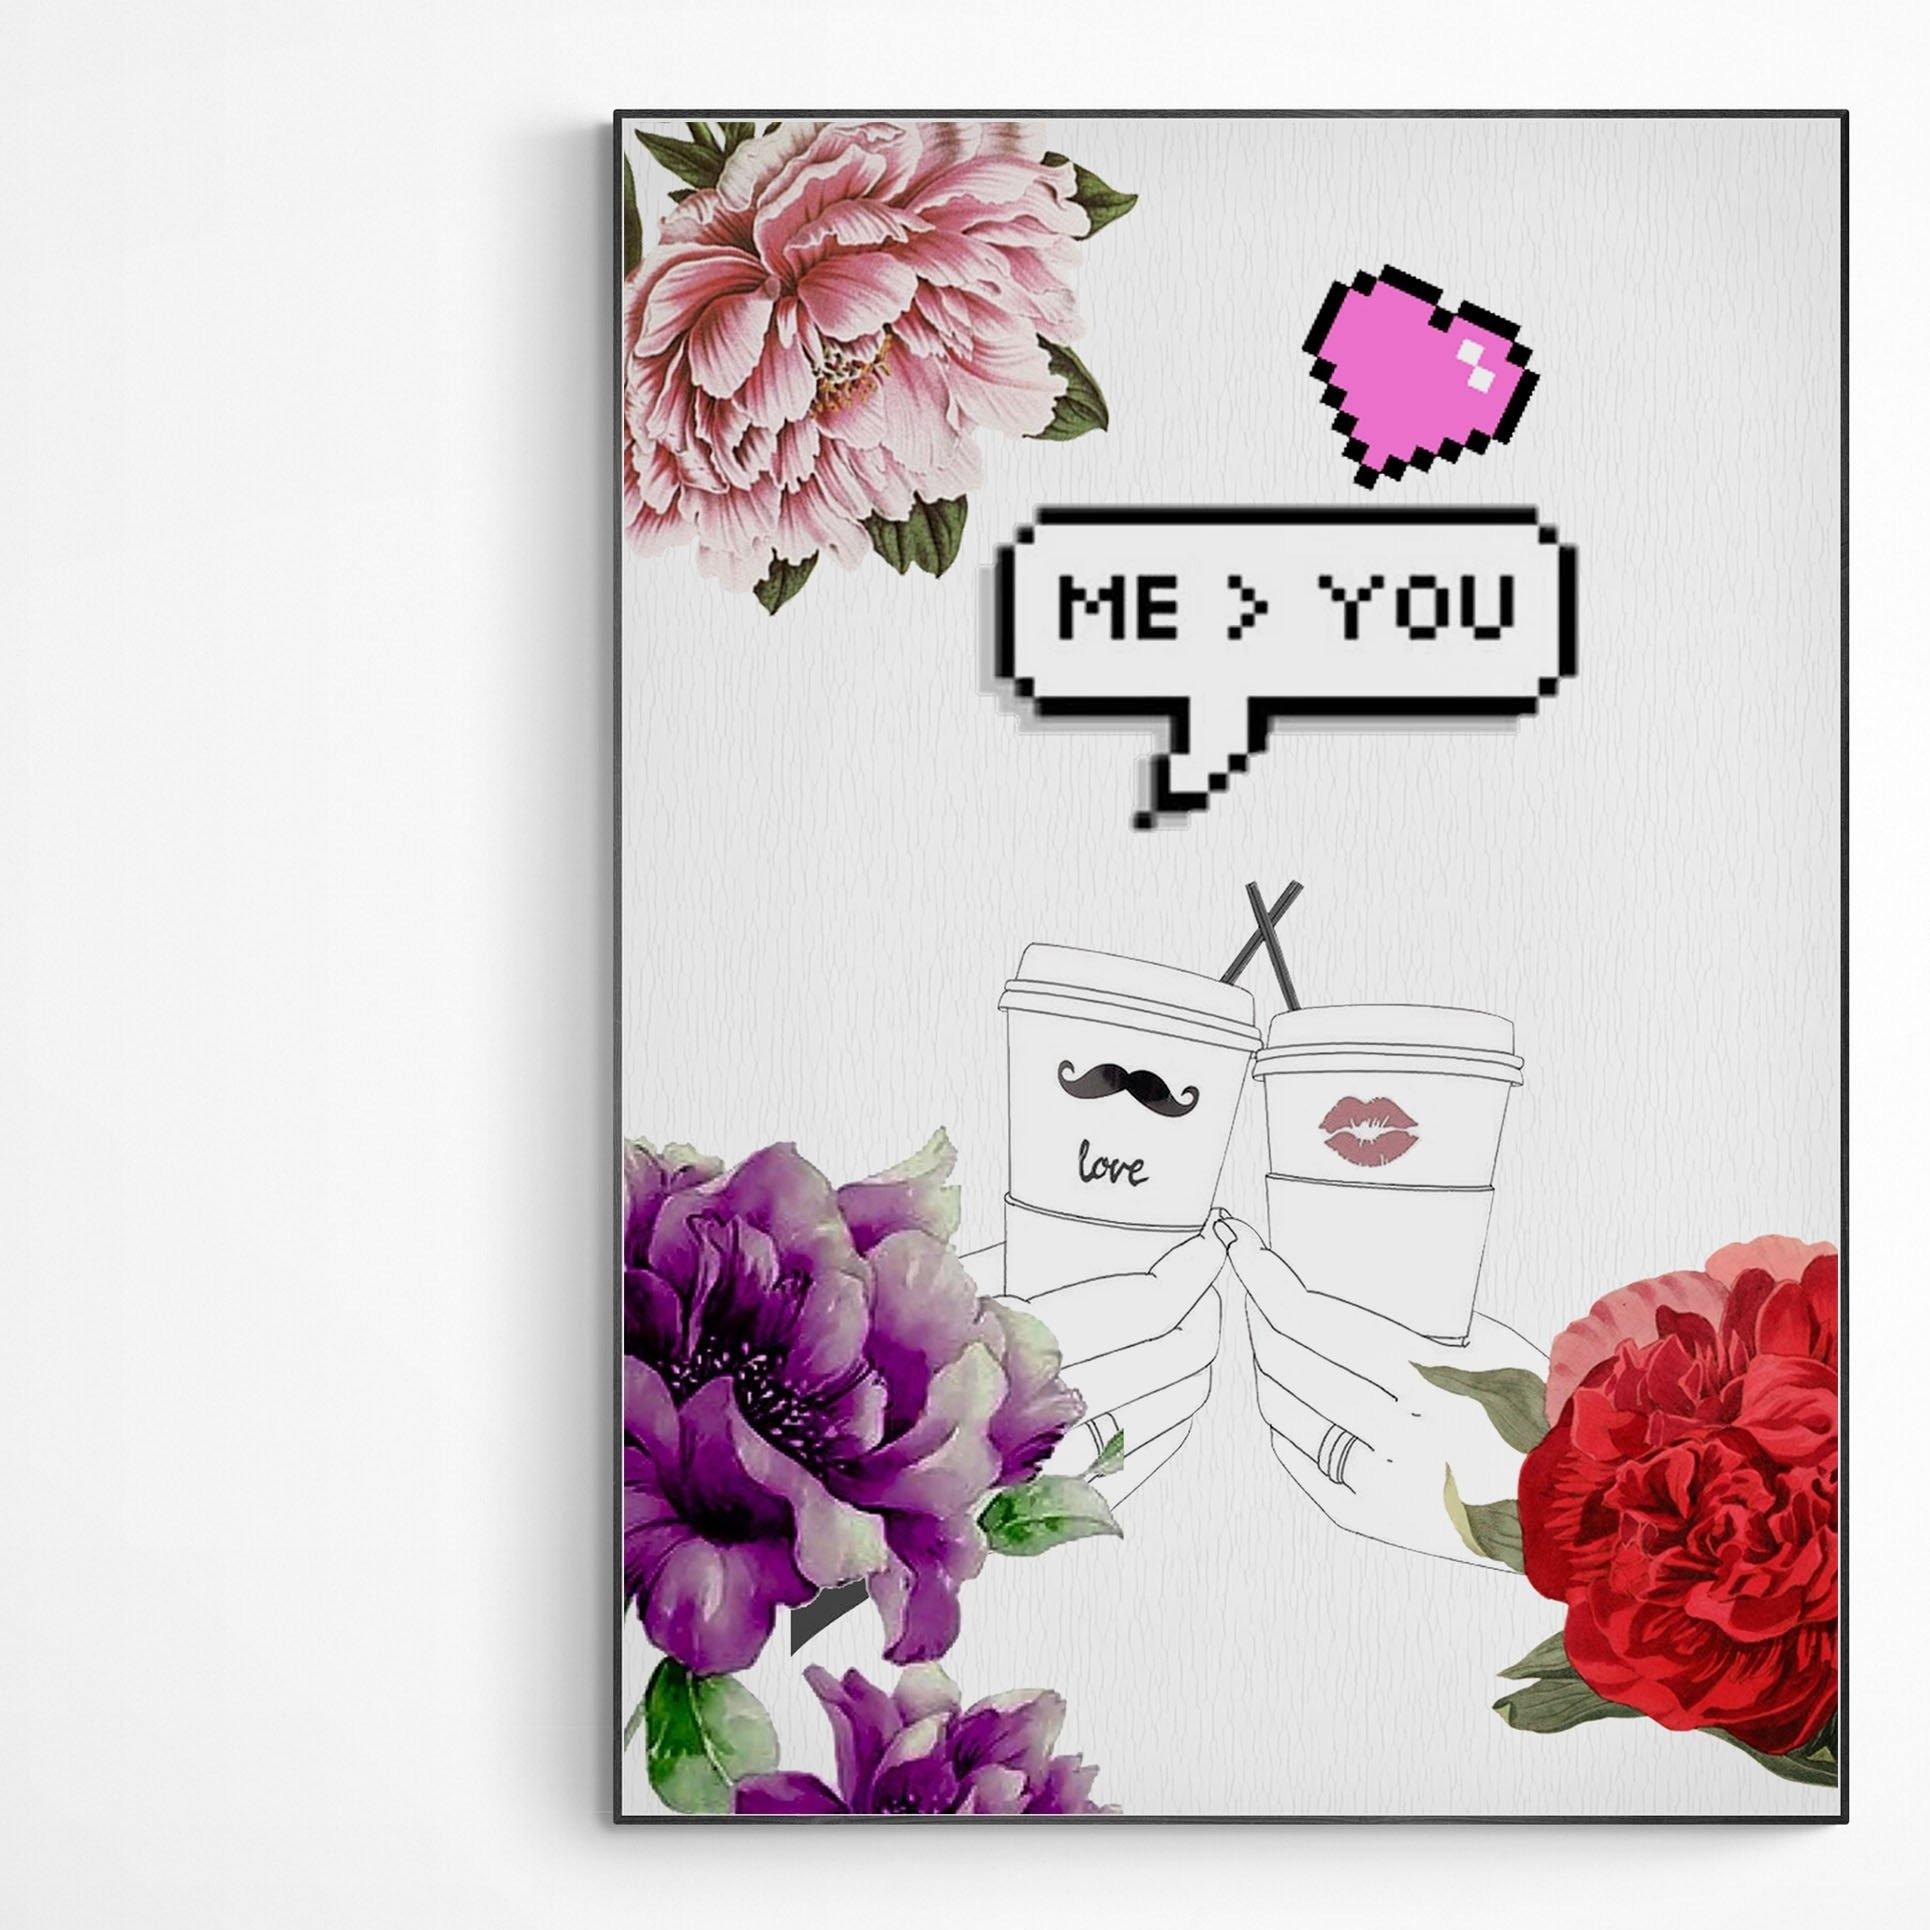 I Love You Poster | Original Poster Art | Gay Print Quote | Motivational Poster Wall Art Decor | Greeting Card Gifts | Variety Sizes